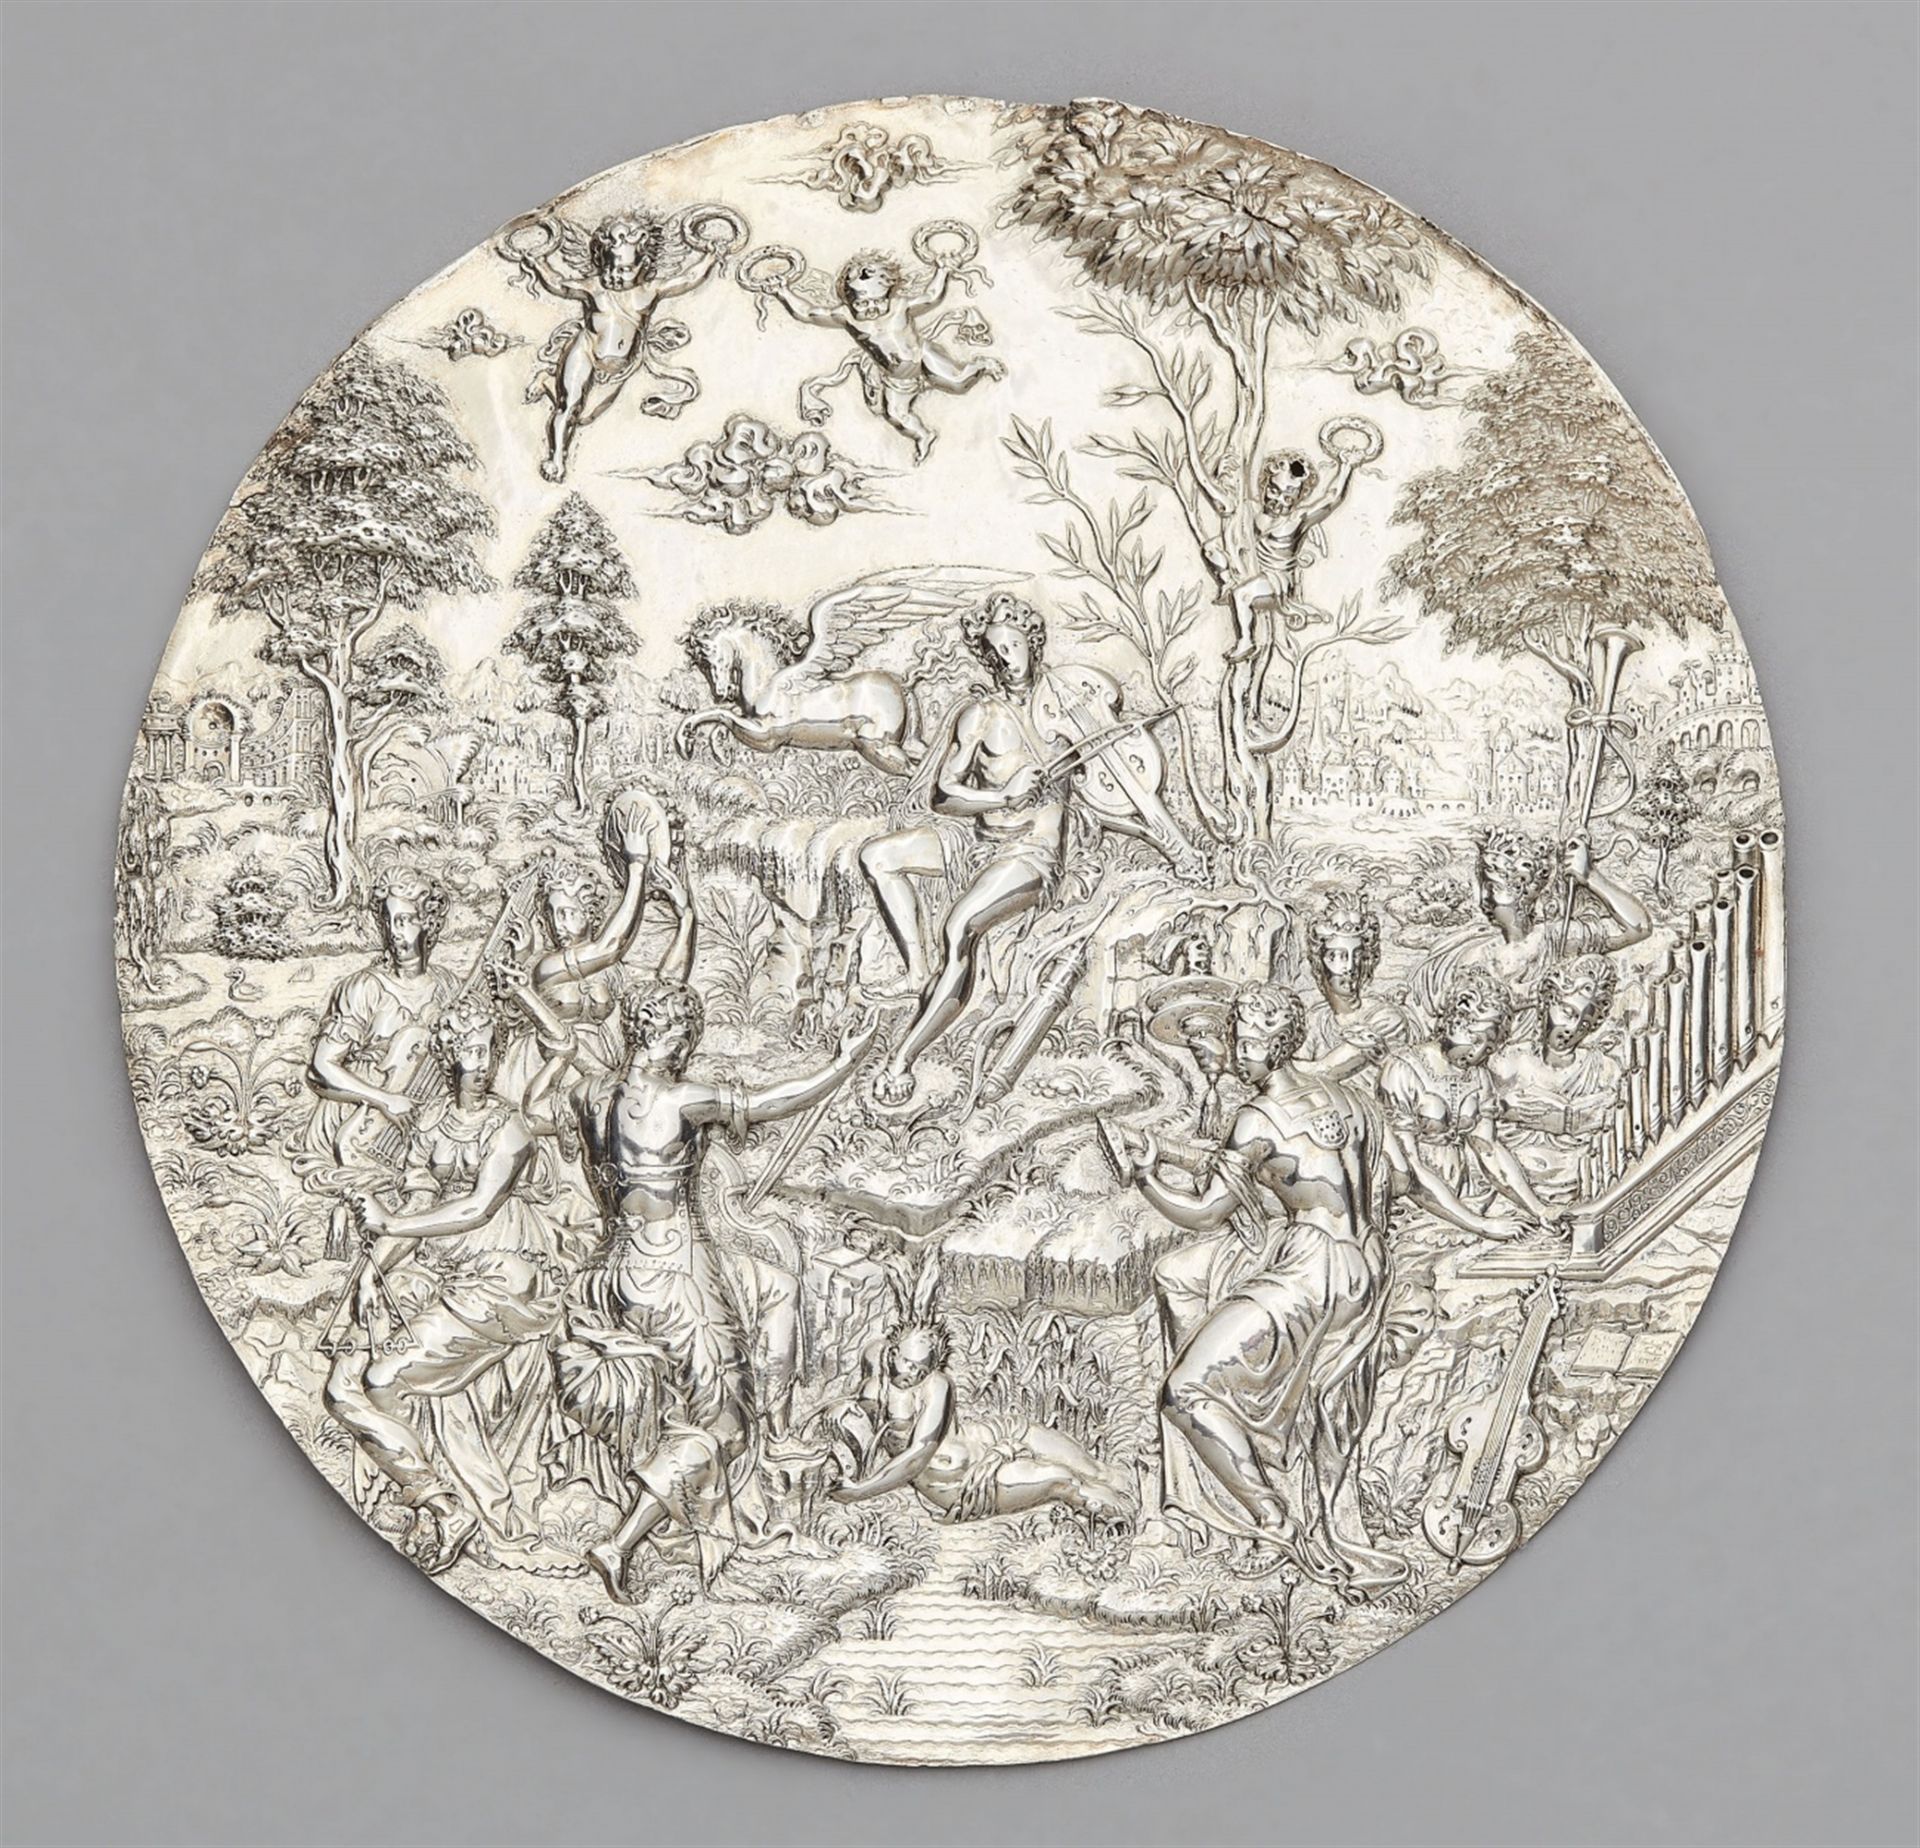 A silver relief with Apollo and the Muses